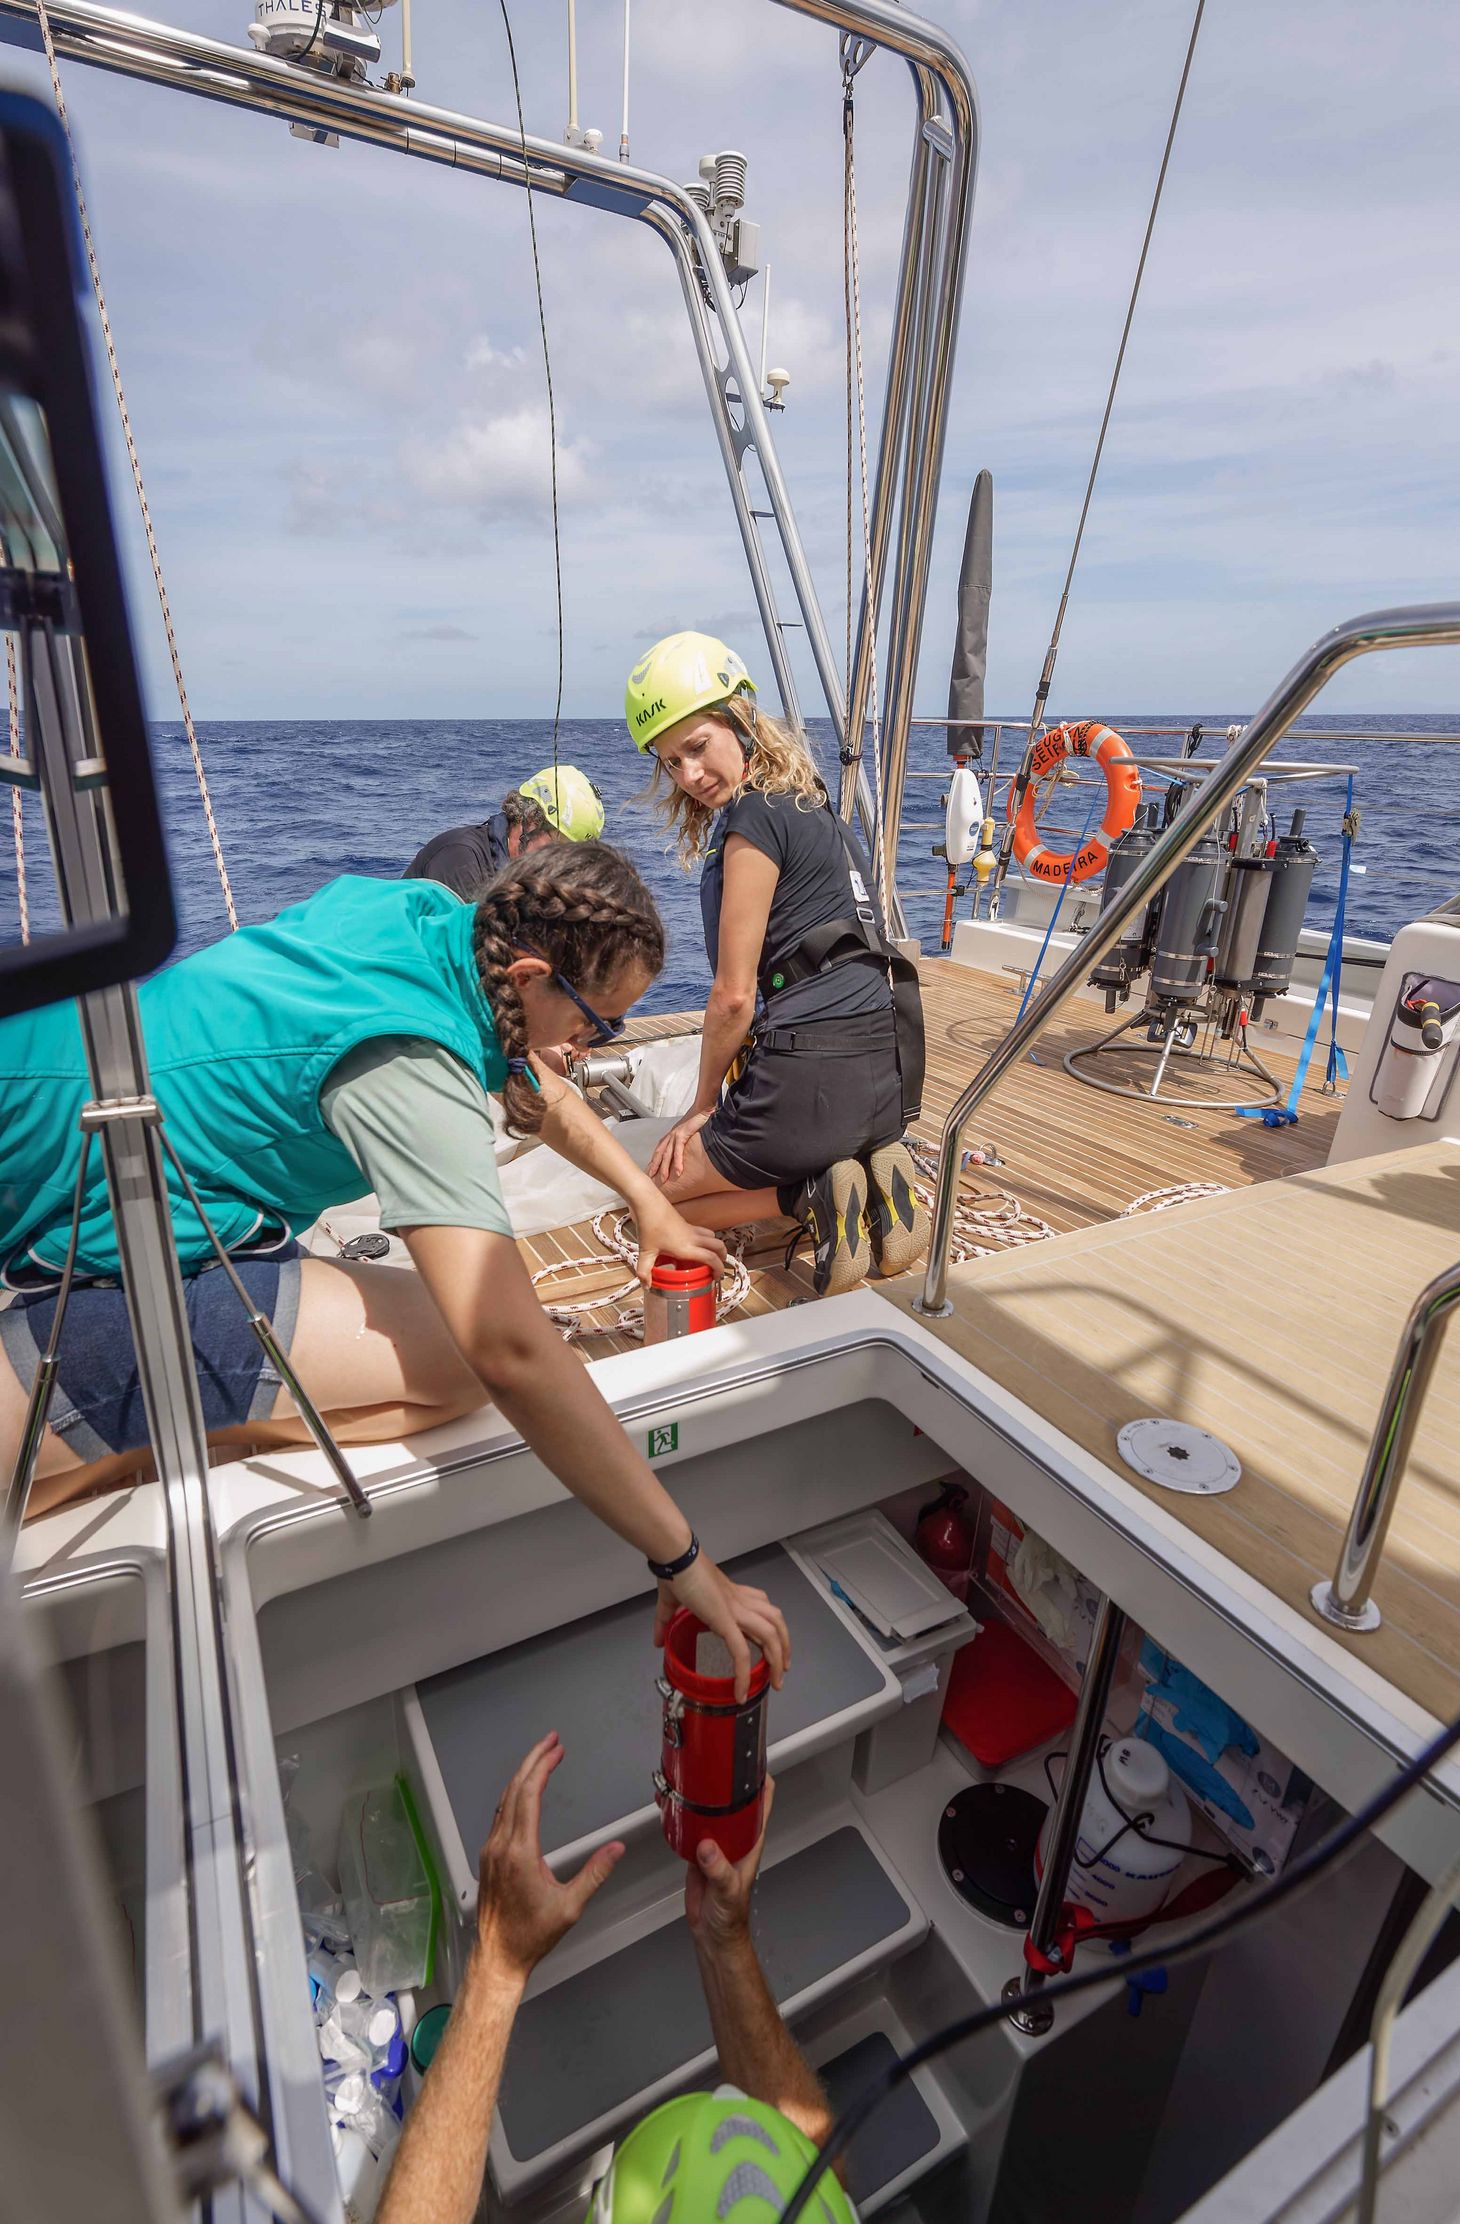 The plankton samples go straight to the “belly” of the yacht, where they are prepared for analysis.